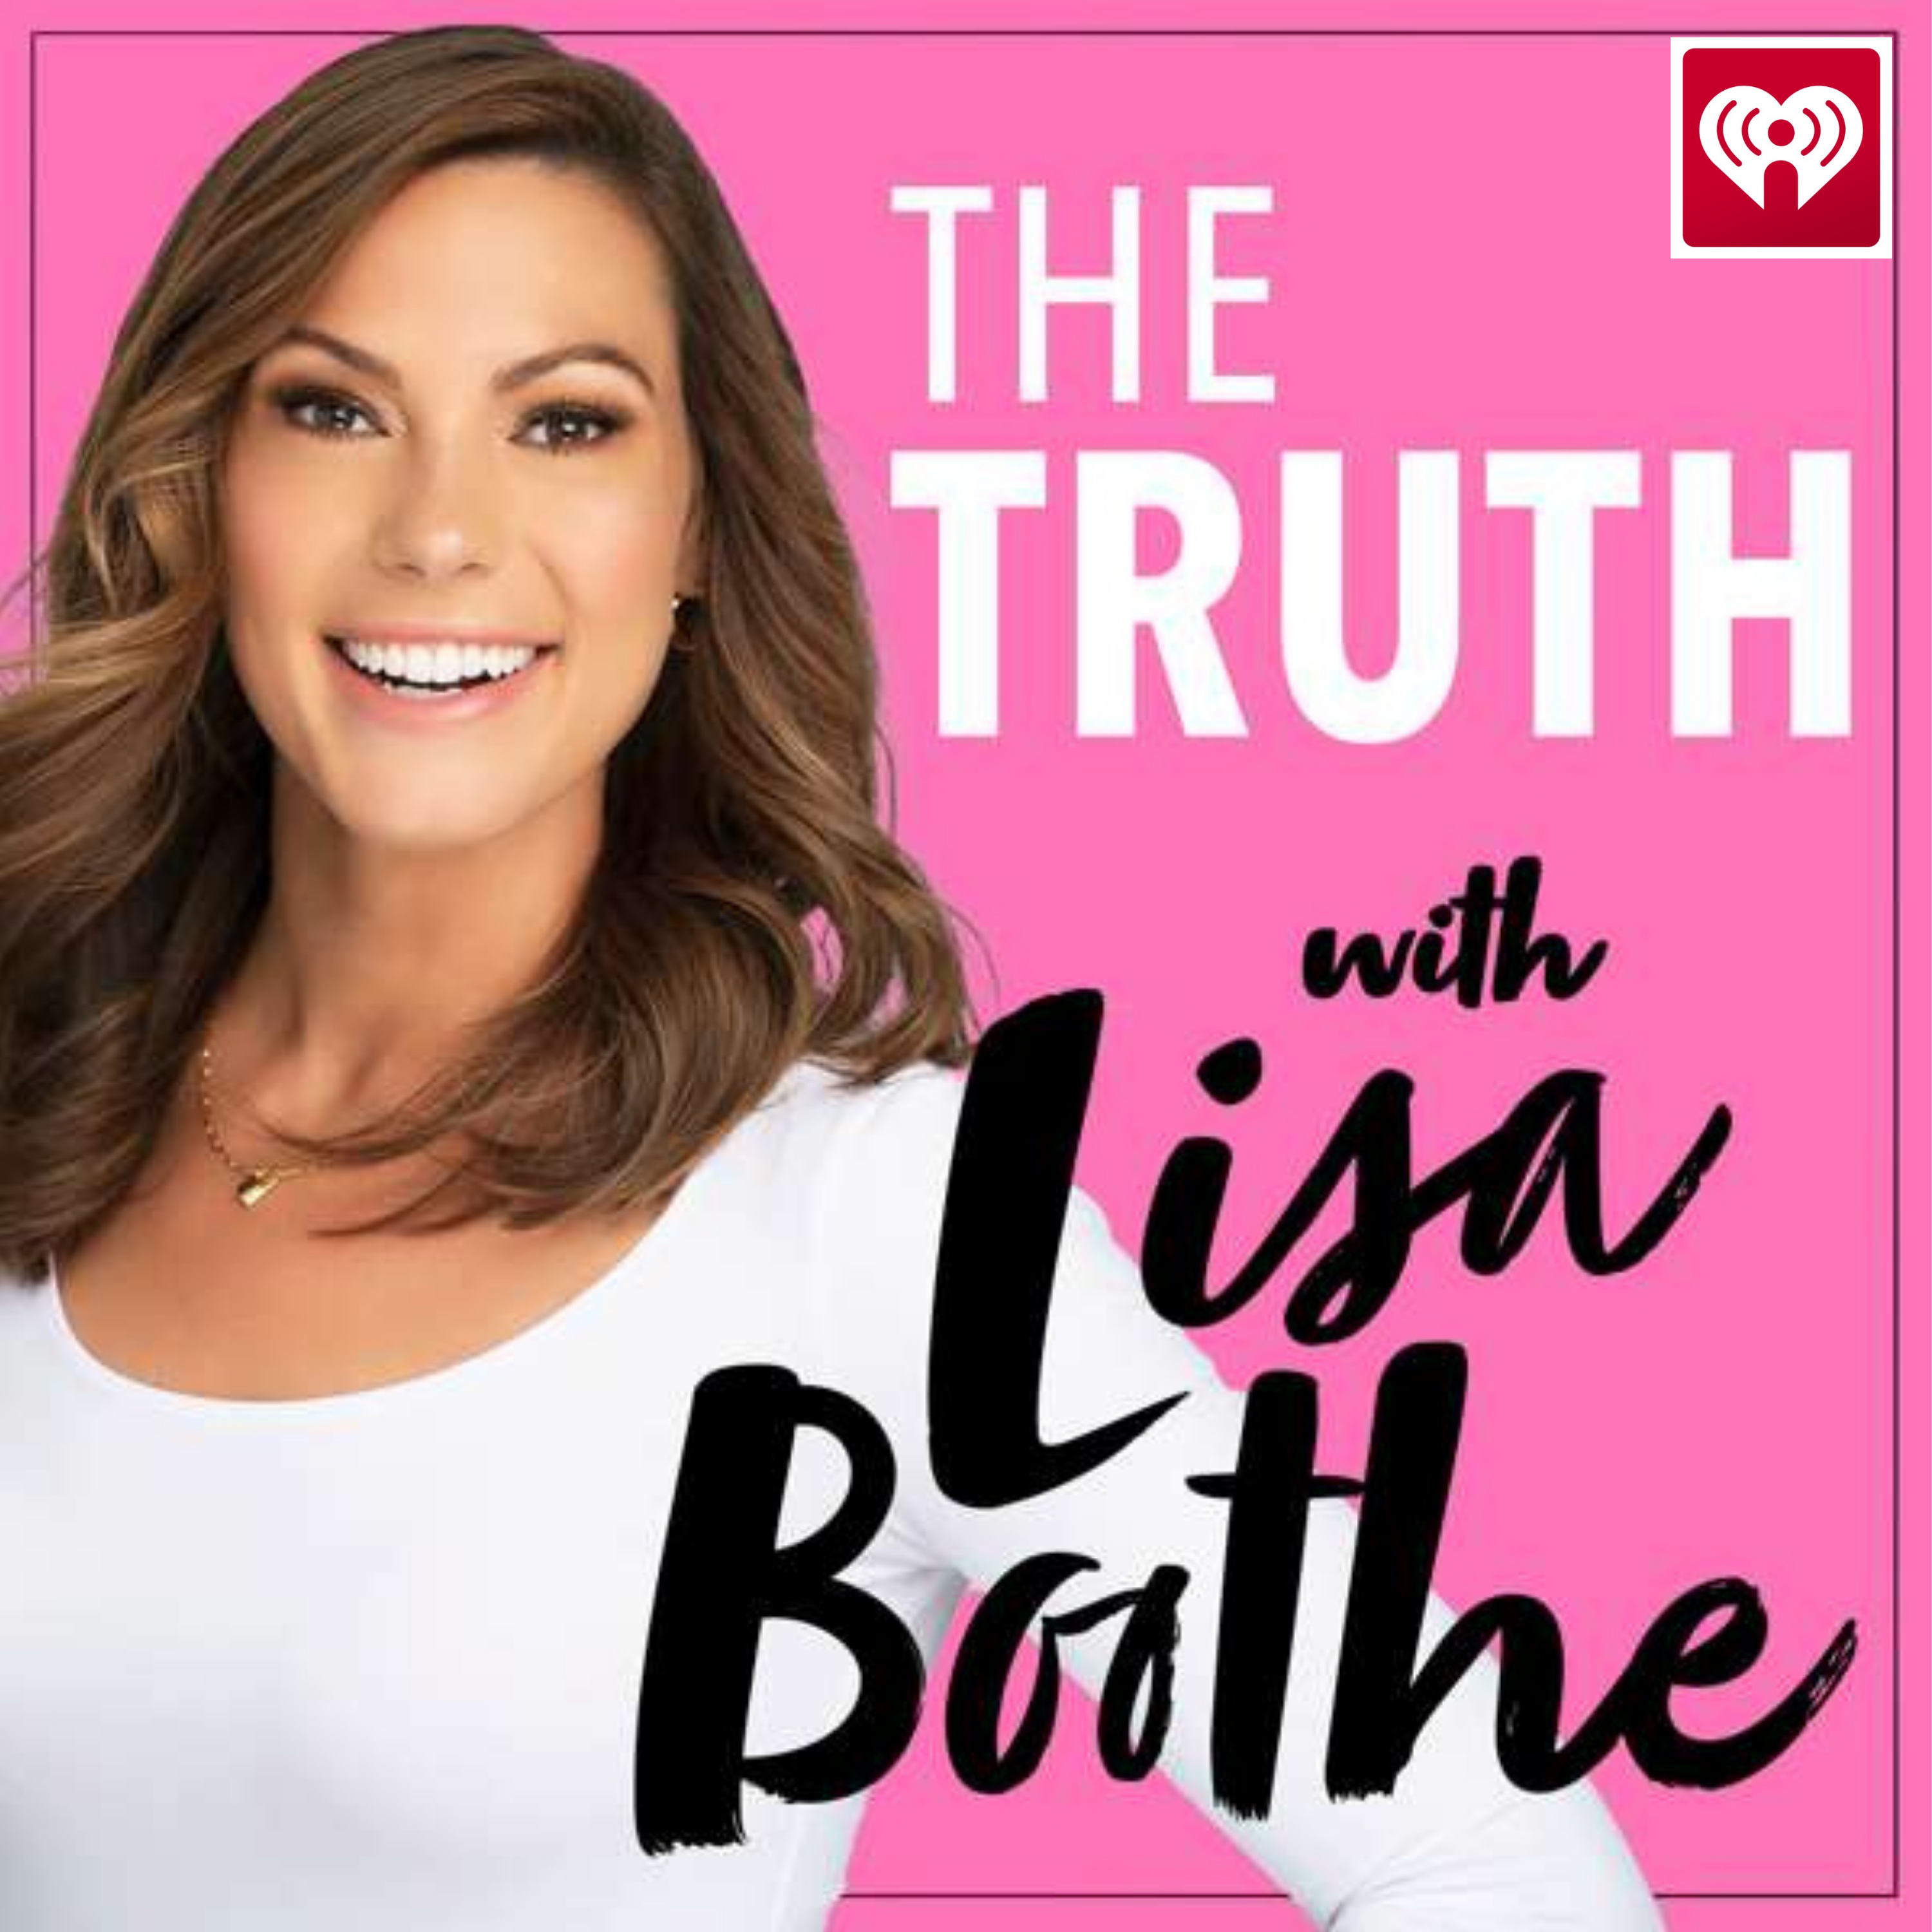 The Truth with Lisa Boothe: Oklahoma’s Opposition to Biden’s Changes to Title IX